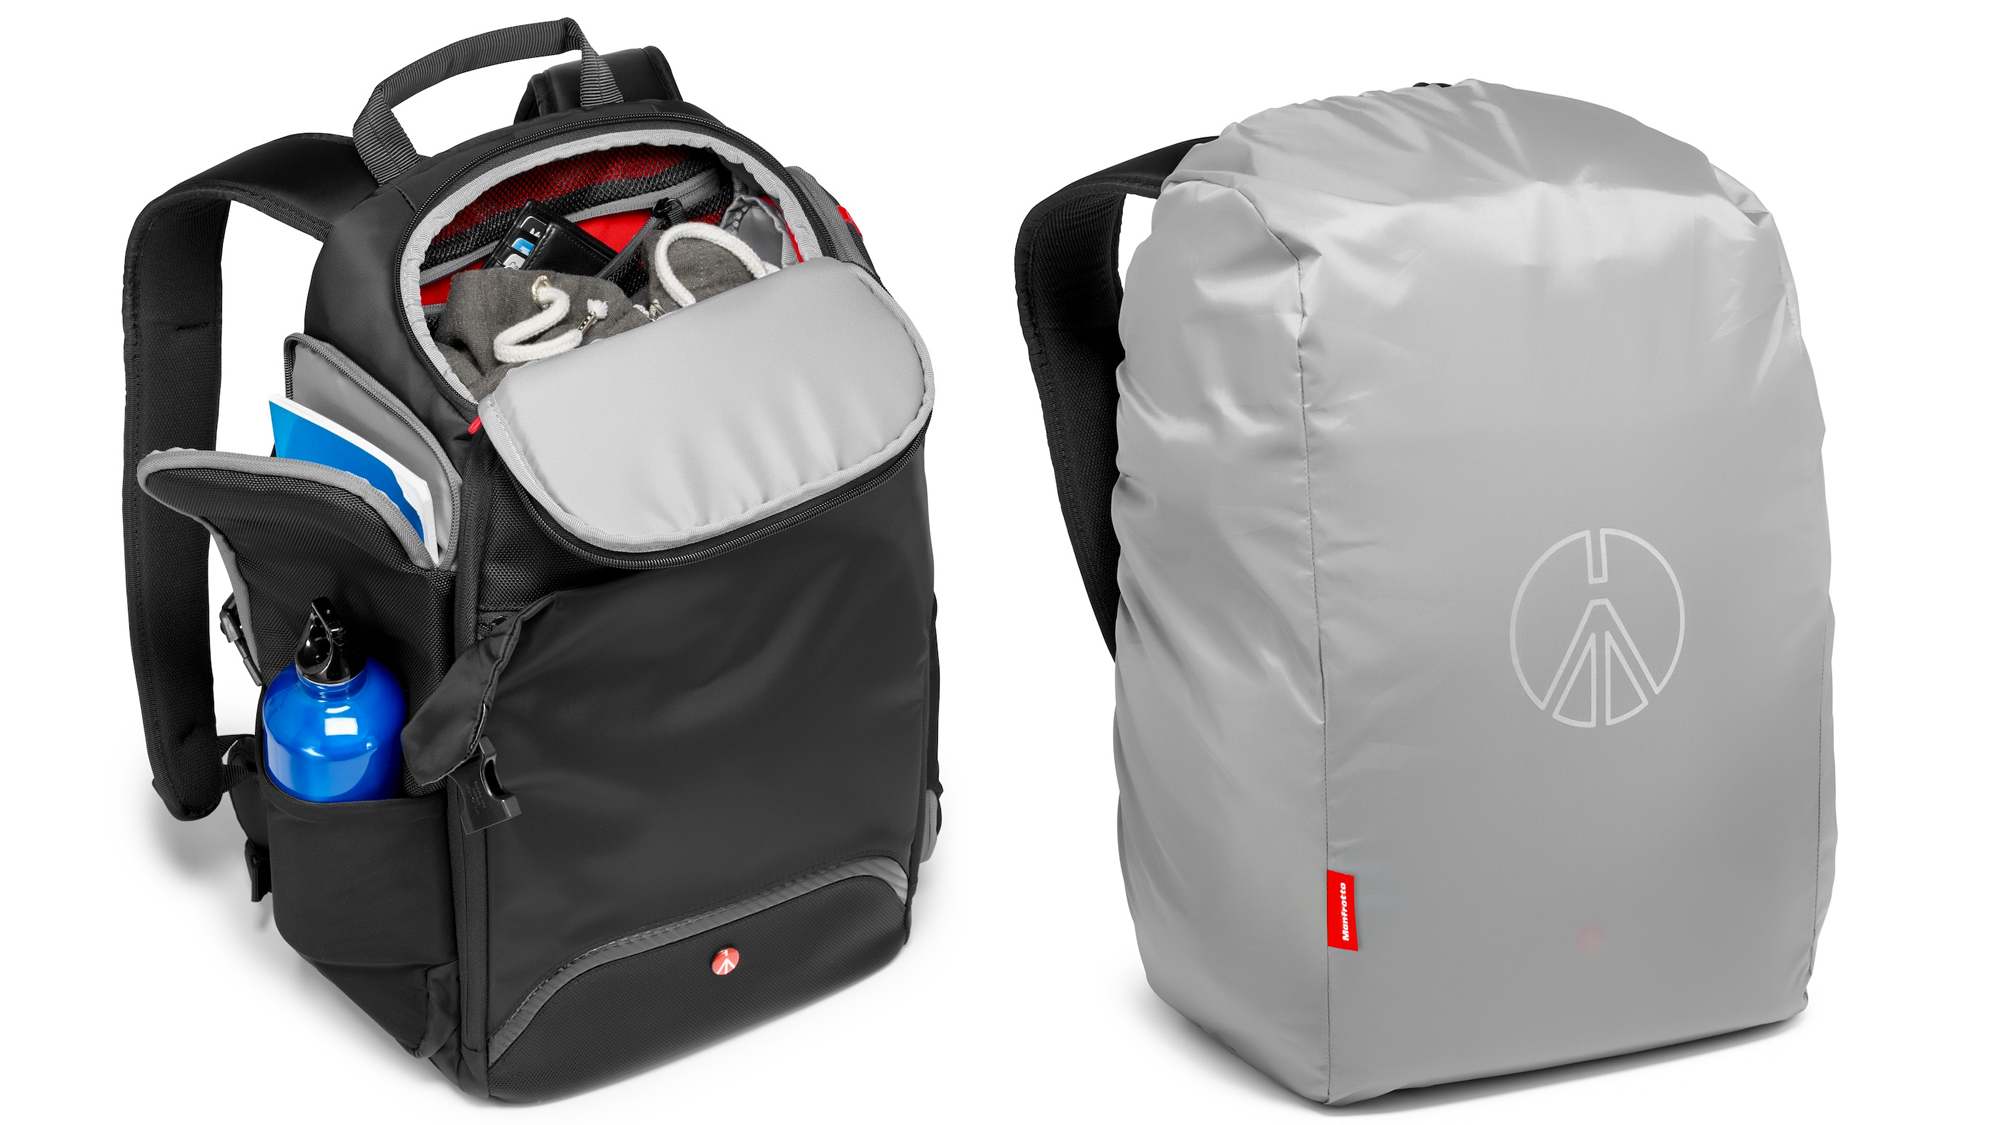 A Rear Opening On Manfrotto’s New Pack Protects Camera Gear With Your Body